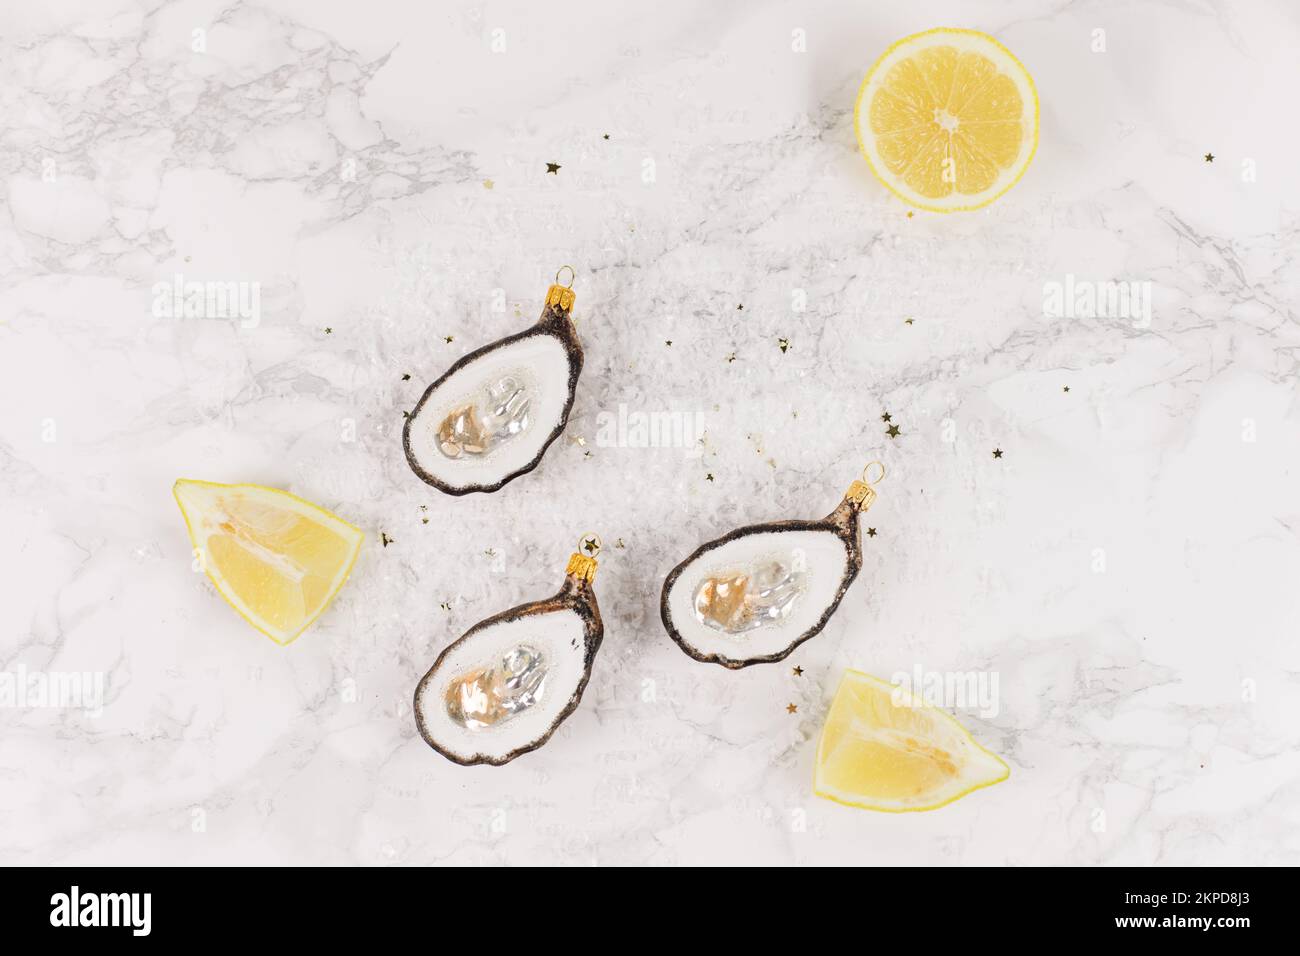 Three Christmas tree baubles in the shape of an oyster are lying on a marble table. Glitter, stars and lemon slices decorate the picture. Stock Photo